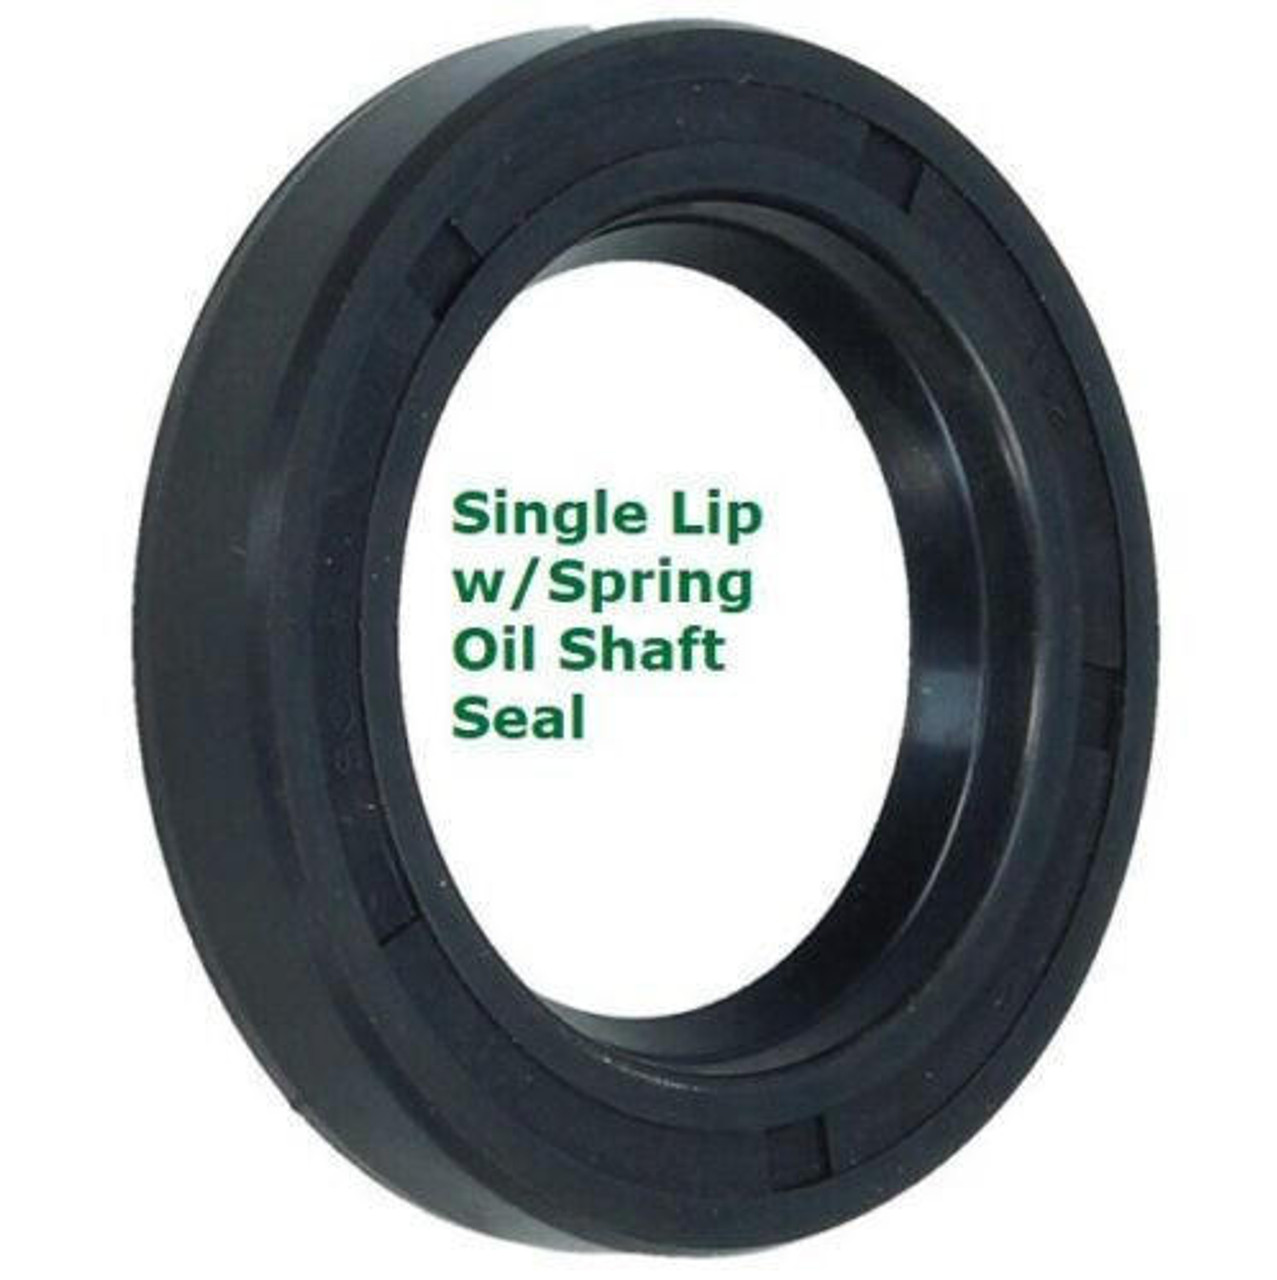 Metric Oil Shaft Seal 88 x 140 x 13mm   Price for 1 pc